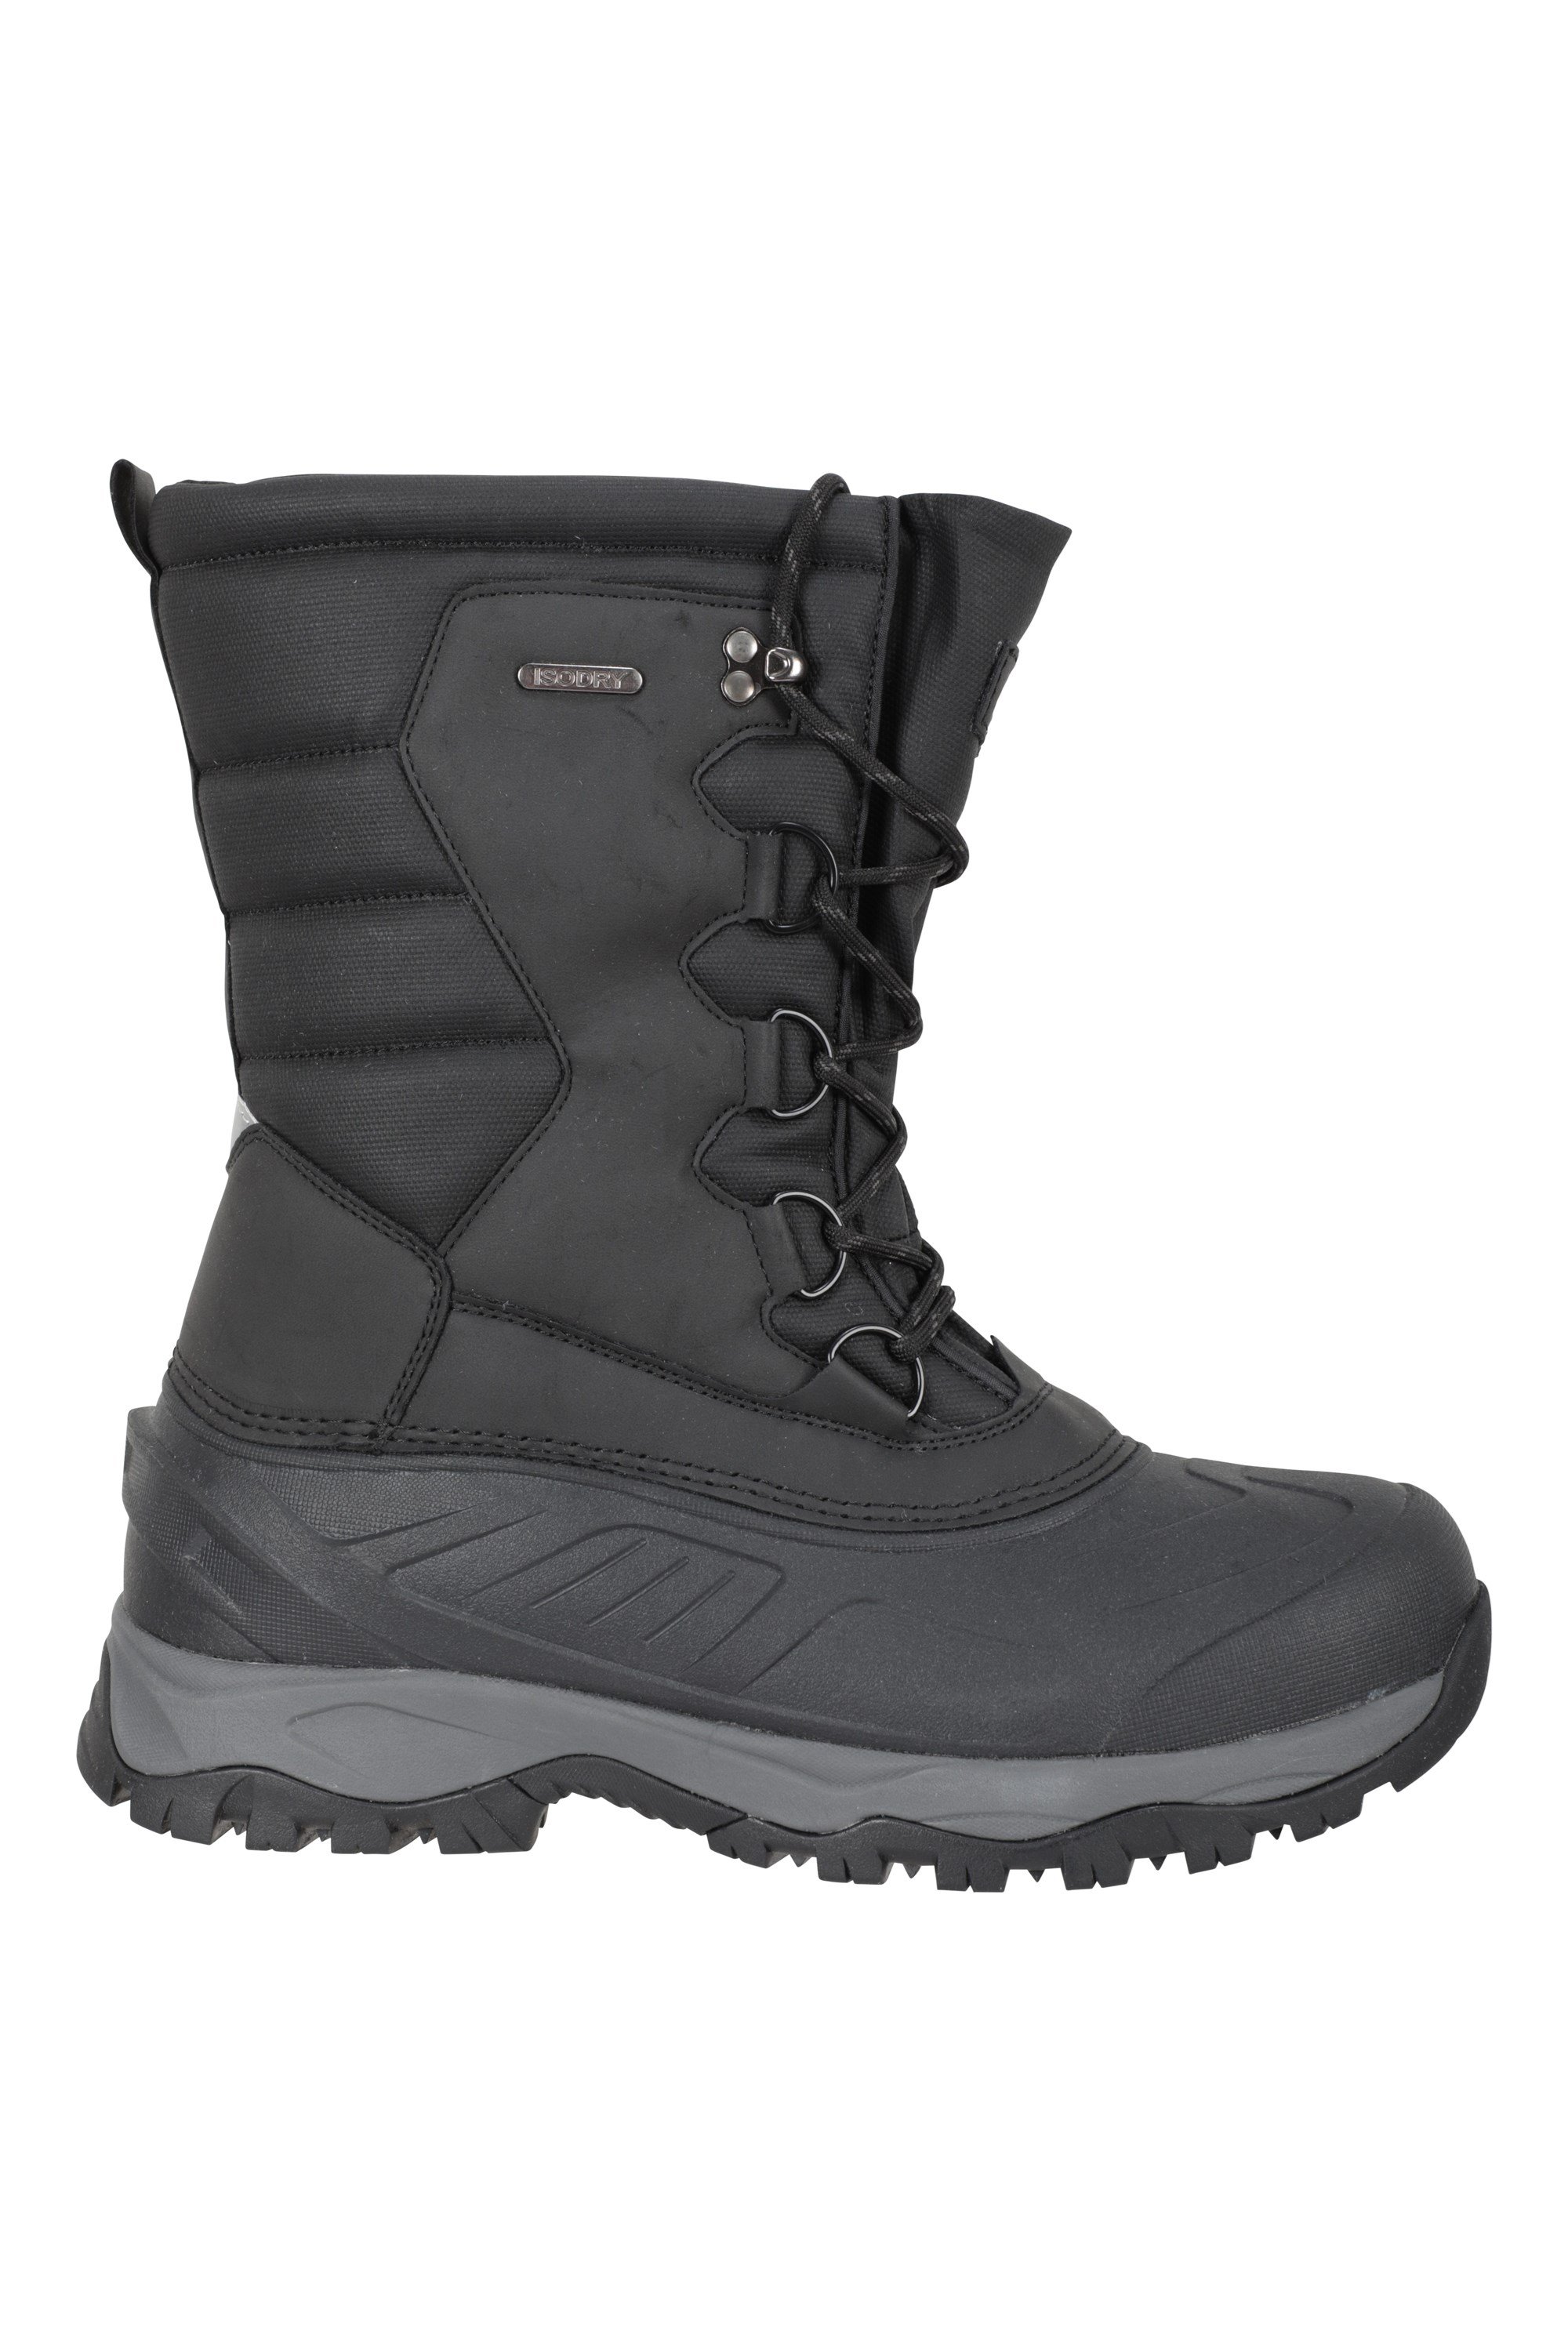 042787 NEVIS EXTREME THERMAL WATERPROOF SNOW BOOT